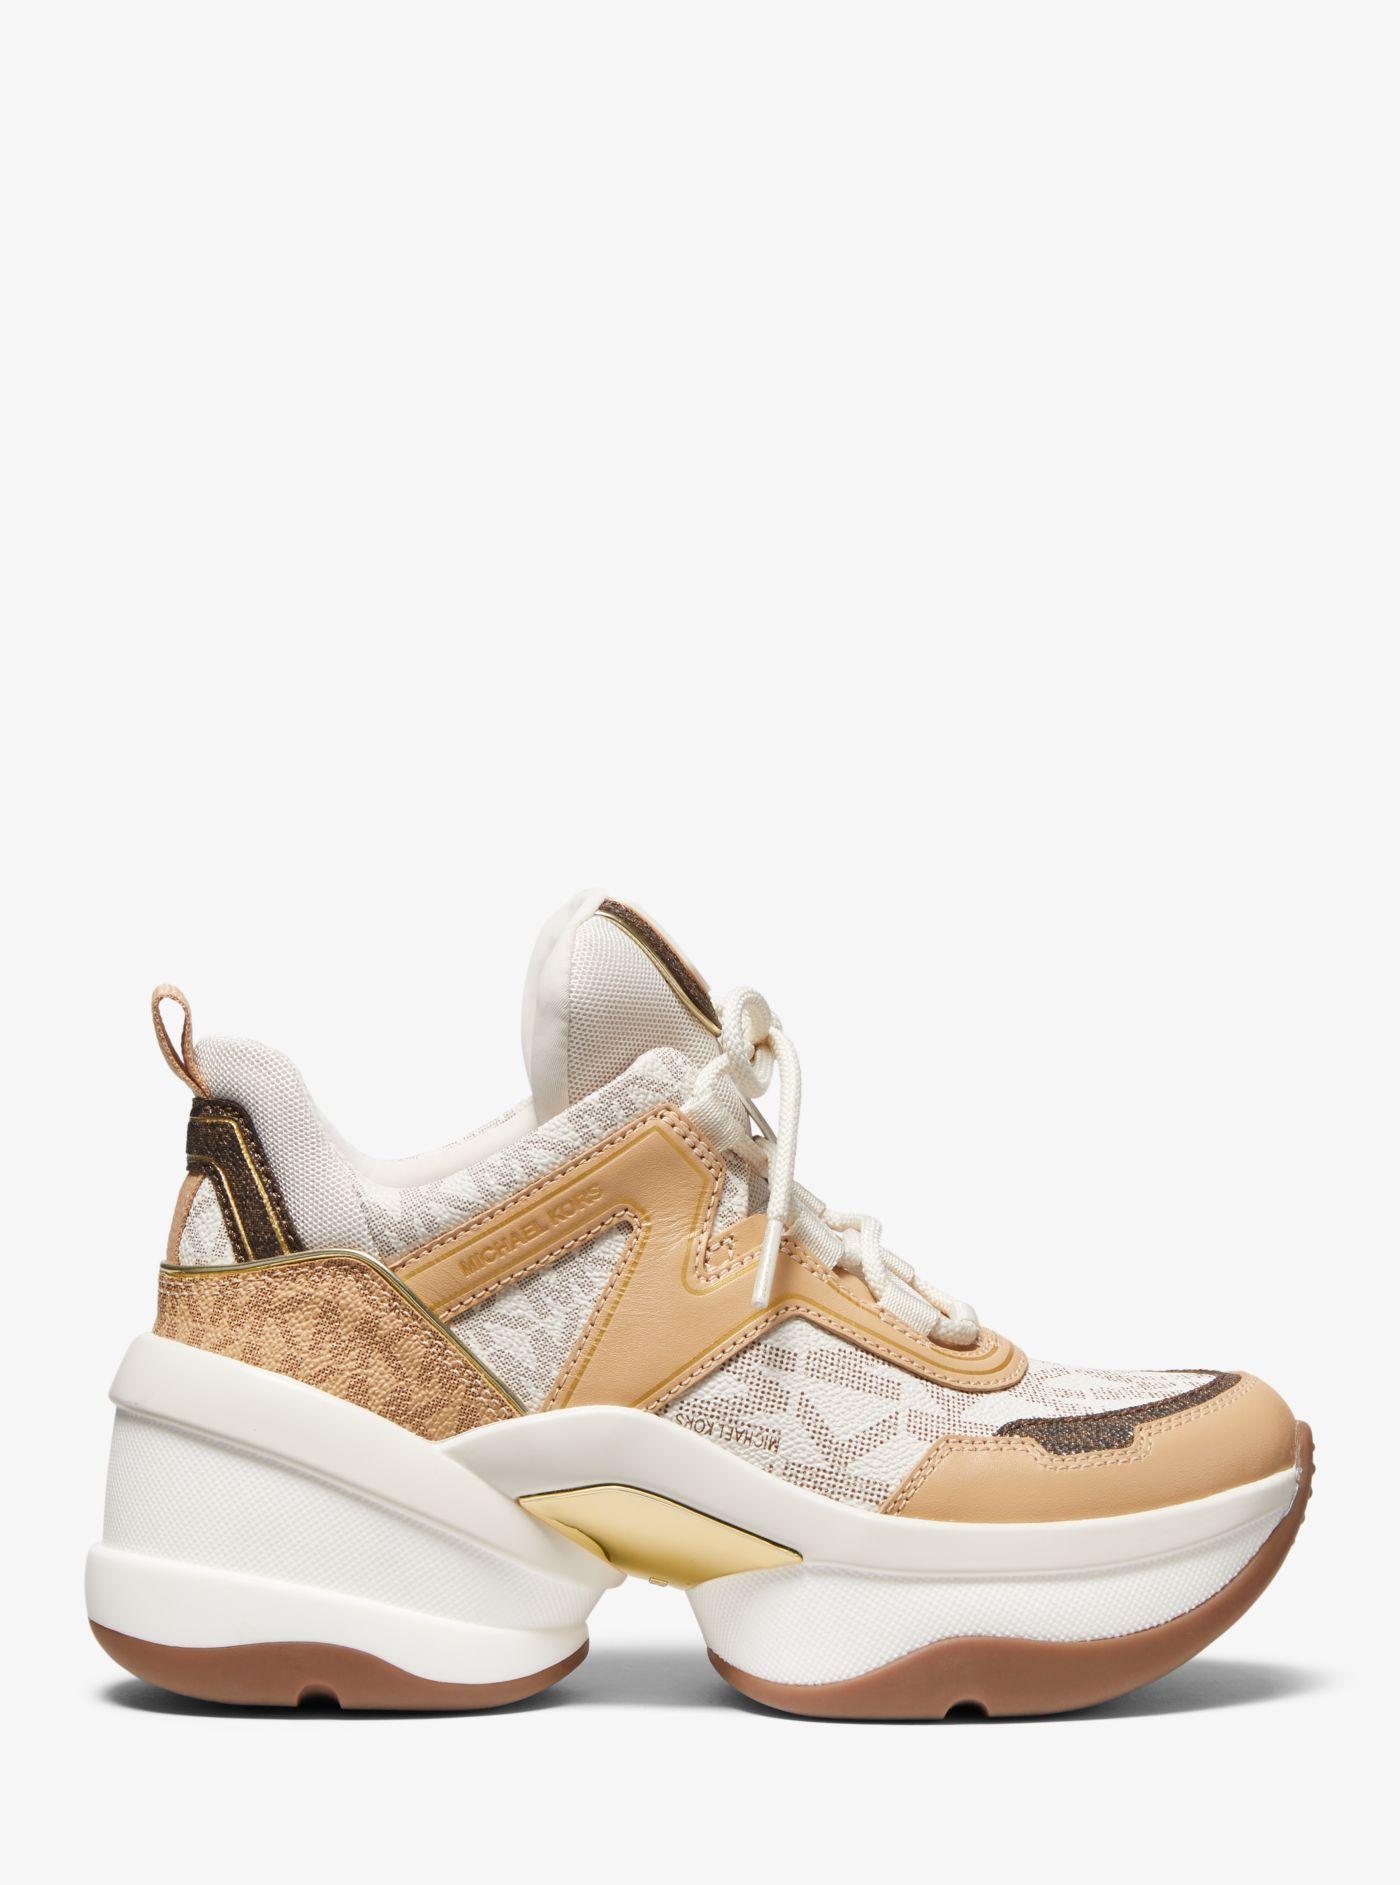 Michael Kors Olympia Logo And Leather Trainer in Vanilla (Natural) | Lyst